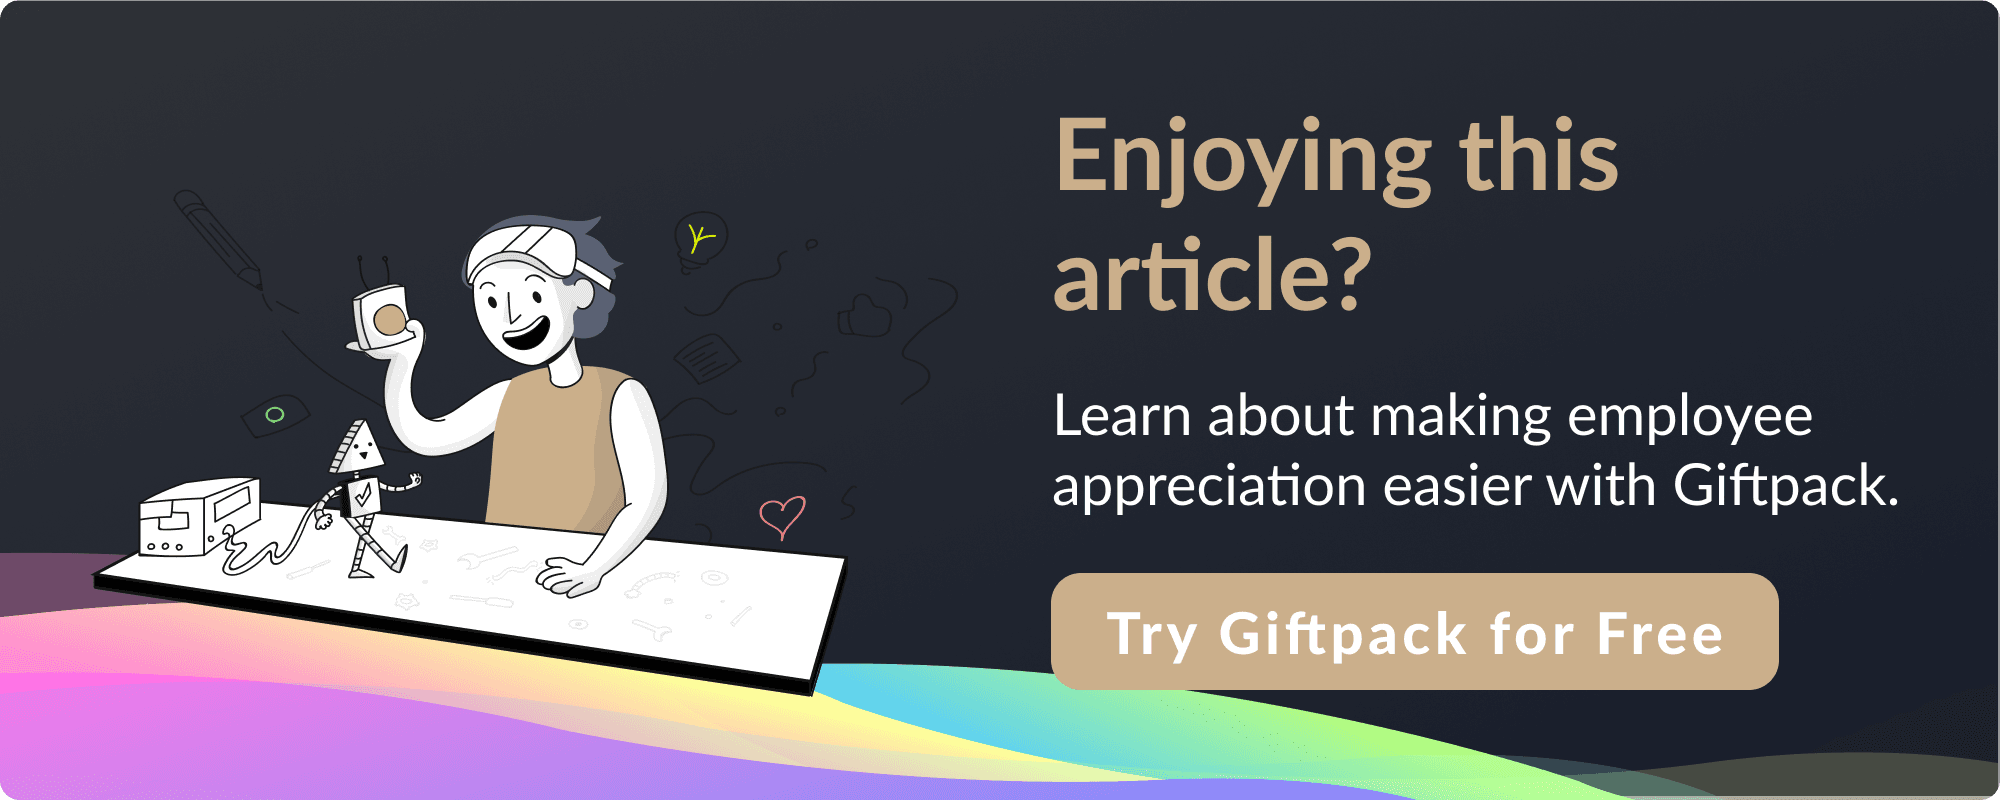 Enjoying this article? Learn about making employee appreciation easier with Giftpack